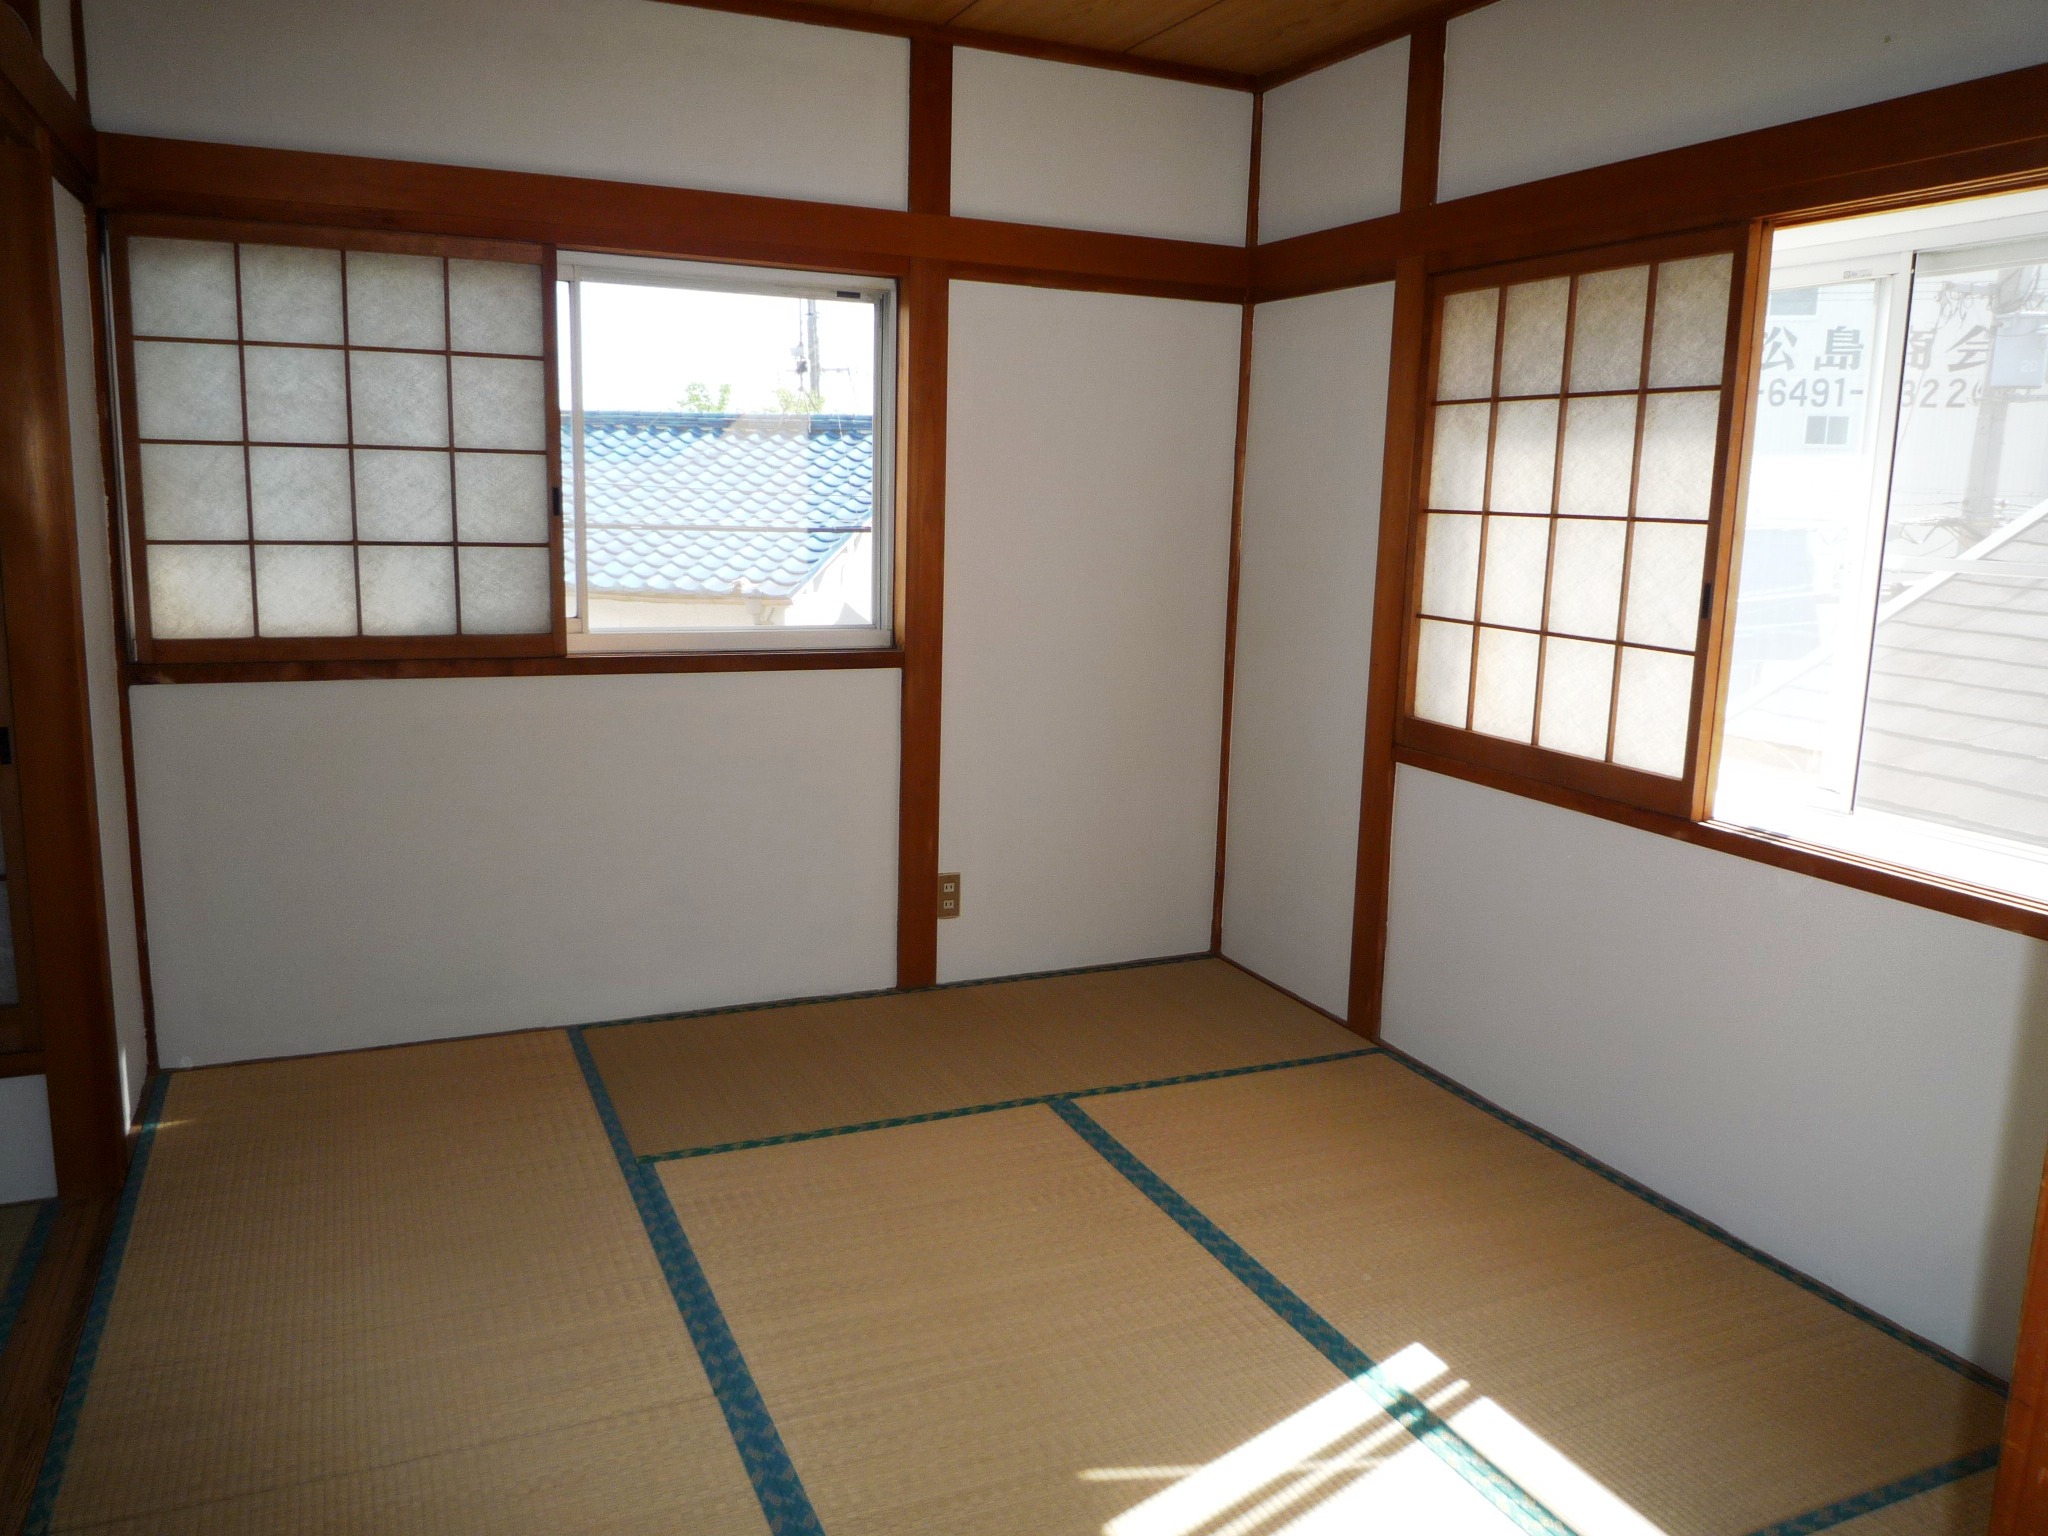 Other room space. The third floor Japanese-style room 6 quires